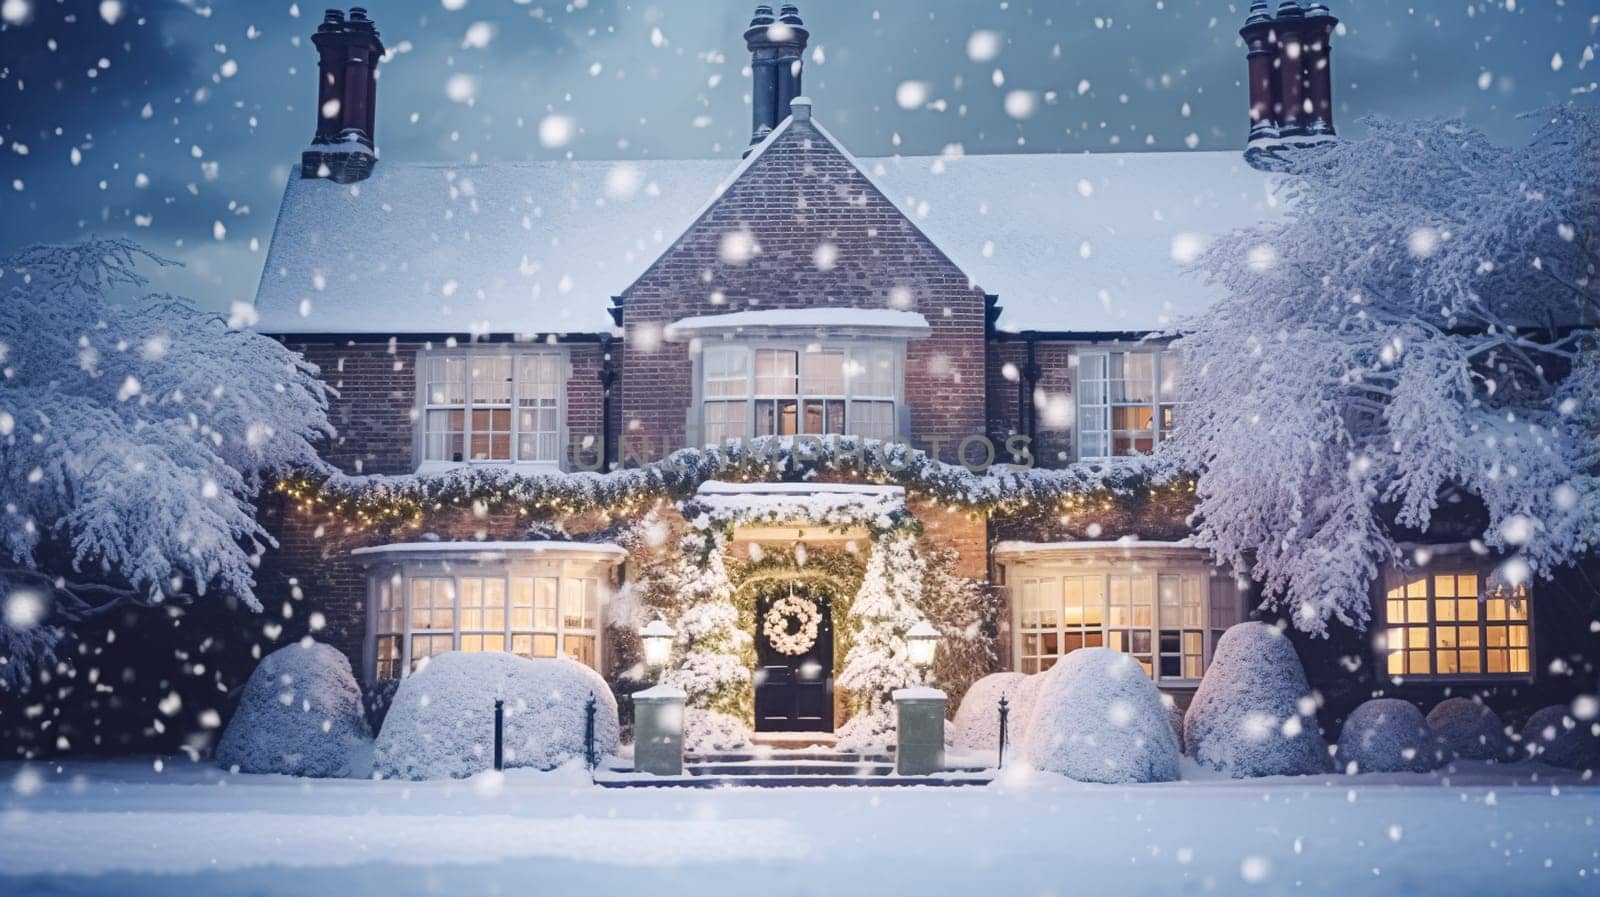 Christmas in the countryside manor, English country house mansion decorated for holidays on a snowy winter evening with snow and holiday lights, Merry Christmas and Happy Holidays design